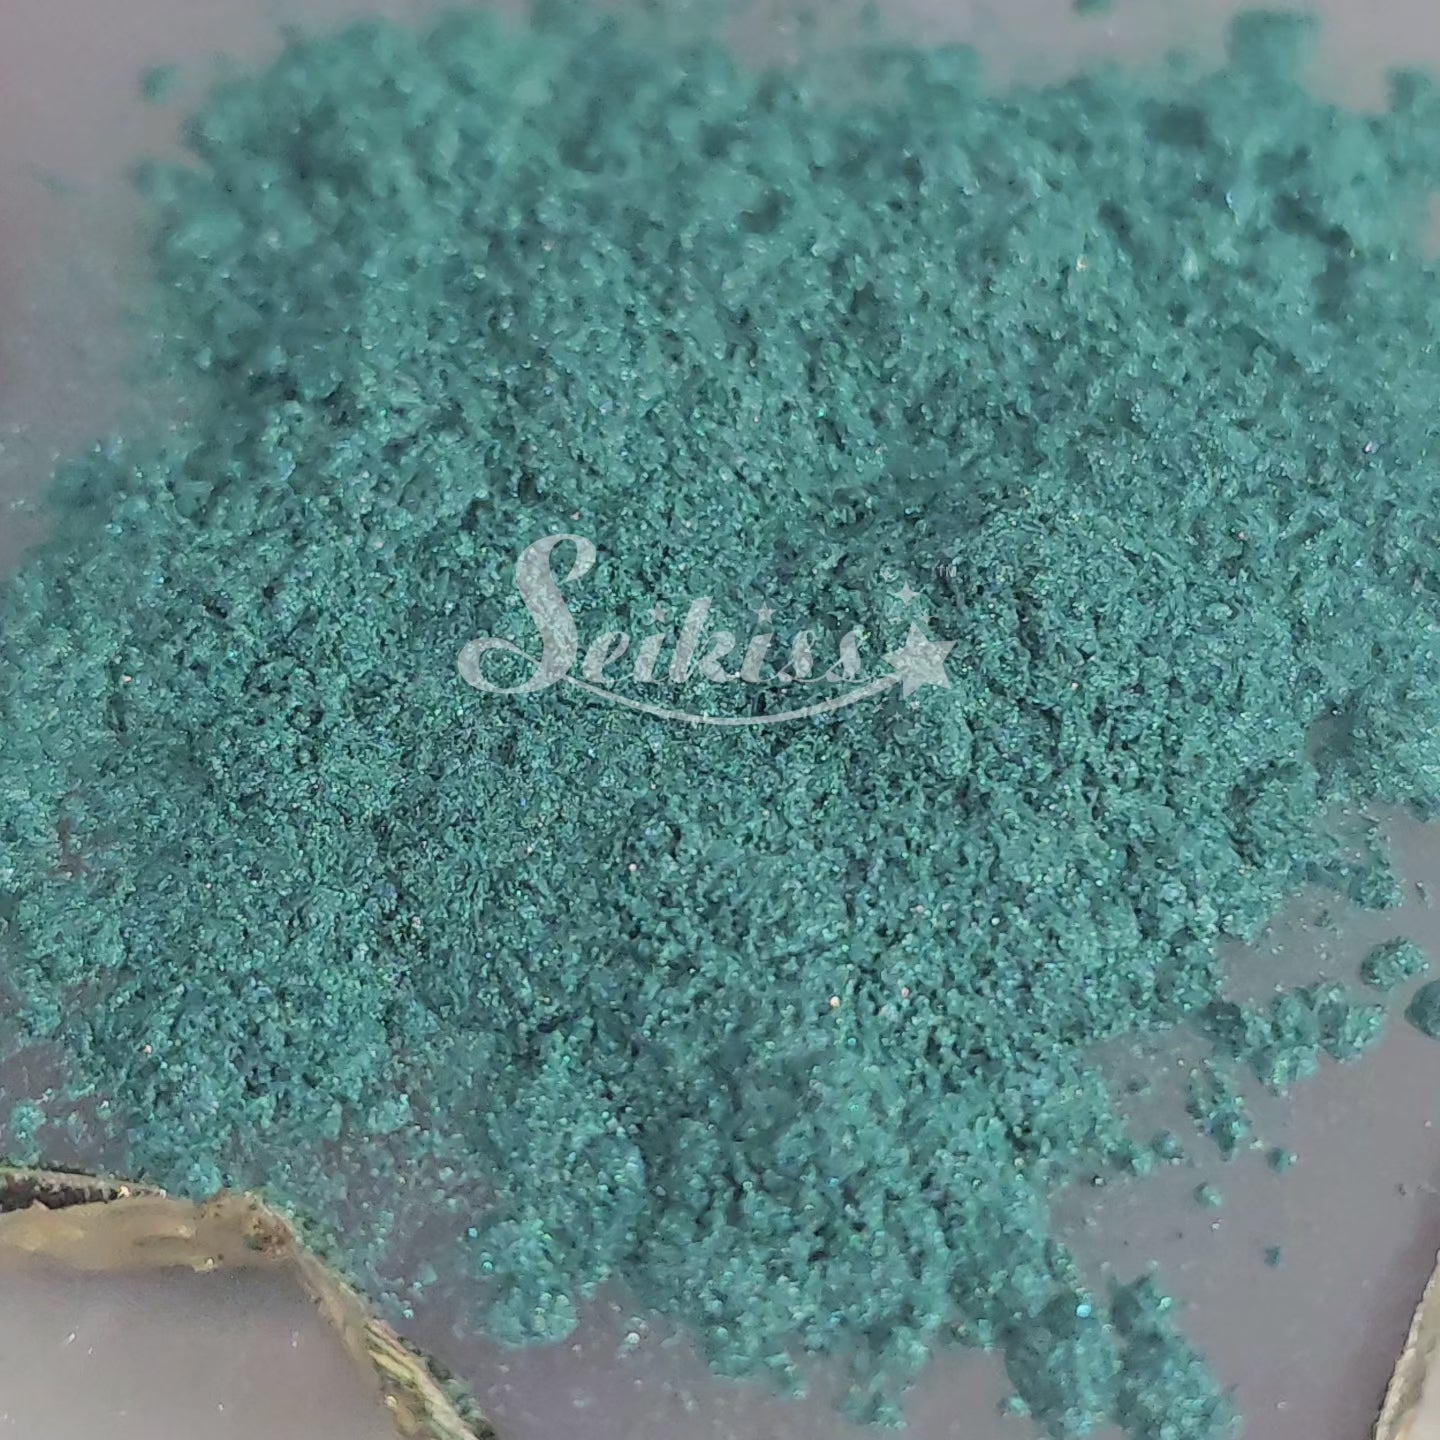 Peacock Green Mica Powder for Resin, Alcohol Ink, Epoxy, Wax Melts - Green Mica